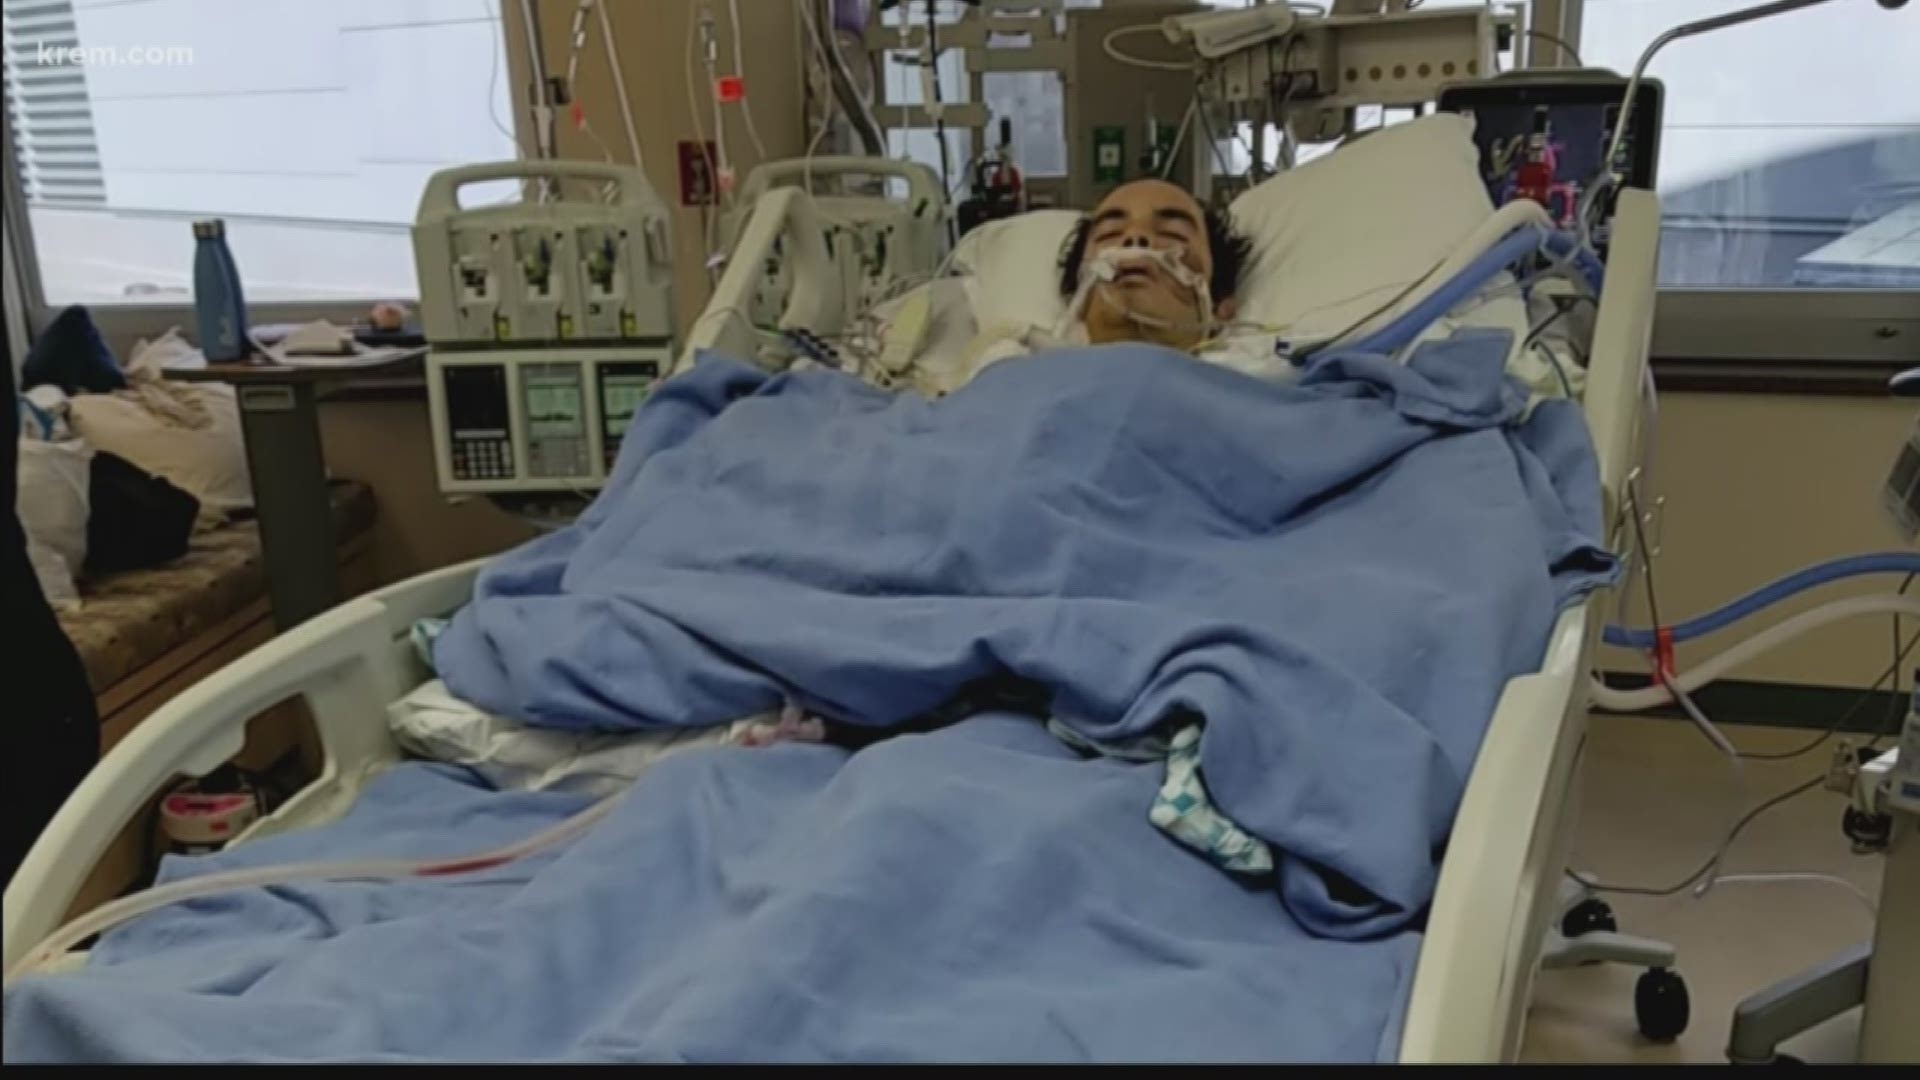 KREM's Taylor Viydo spoke with a Post Falls man who suffered a rat bite, which required open heart surgery and set him back hundreds of thousands of dollars.